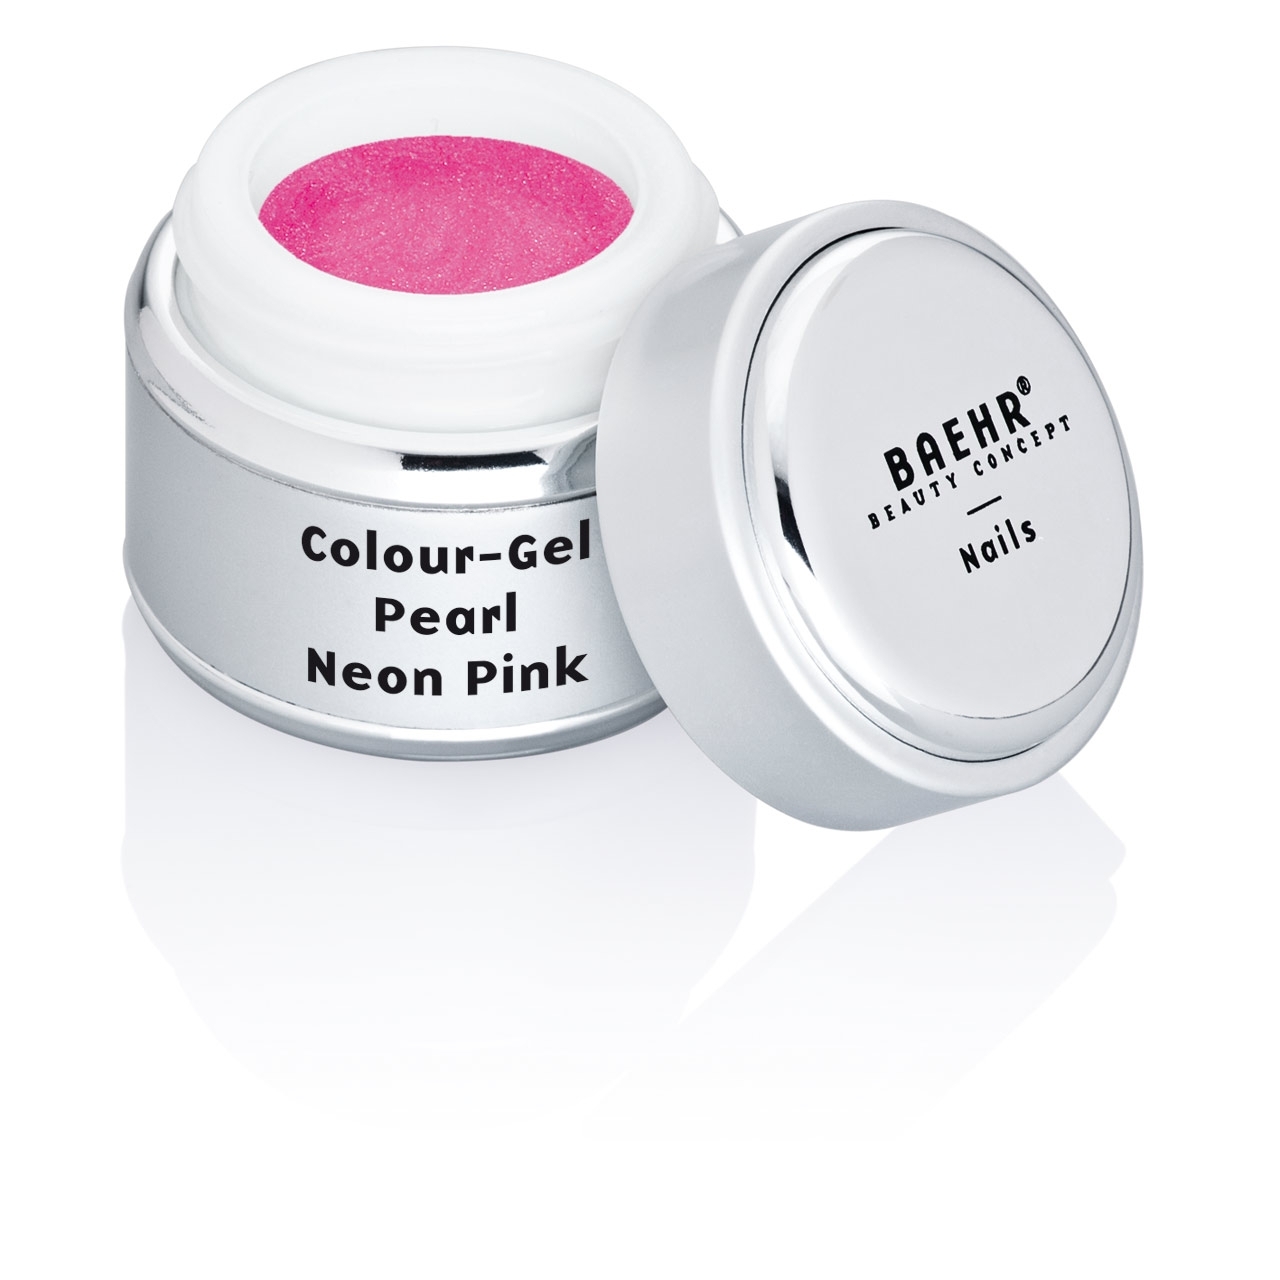 BAEHR BEAUTY CONCEPT - NAILS Colour-Gel Pearl Neon Pink 5 ml